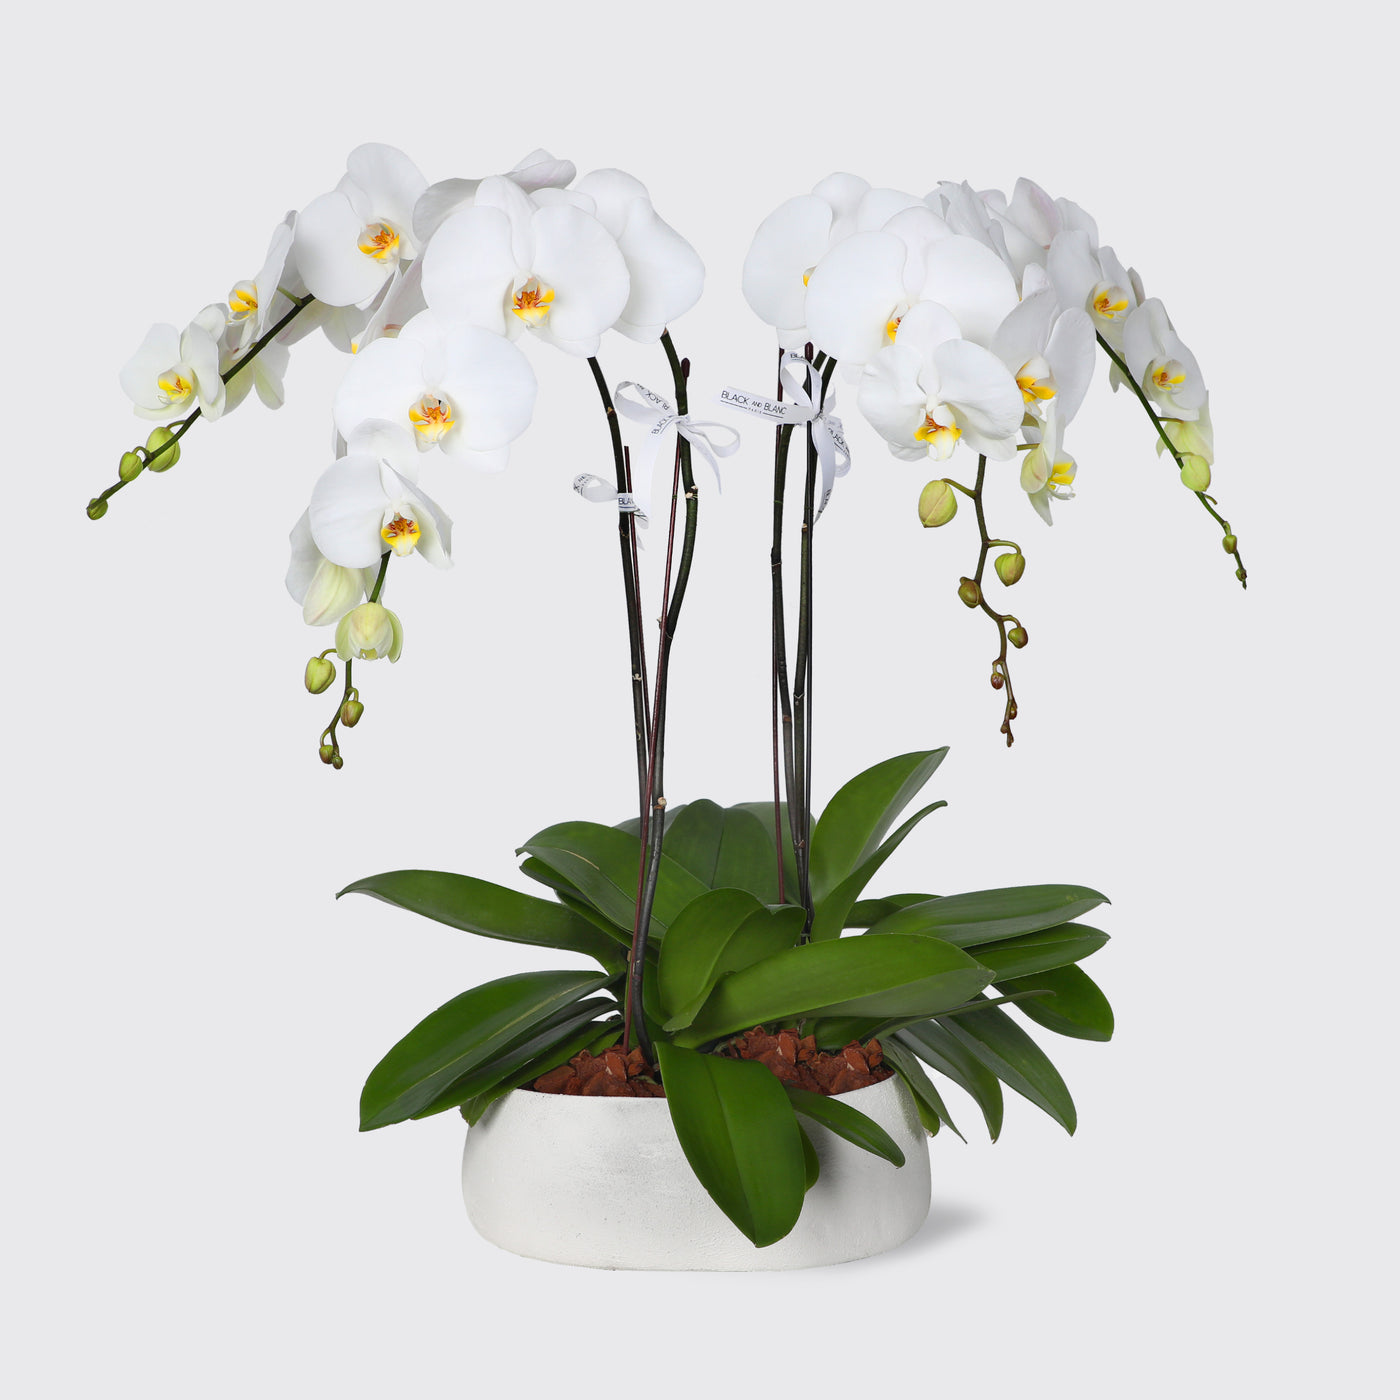 White Orchidées in Vase - Fresh Flowers